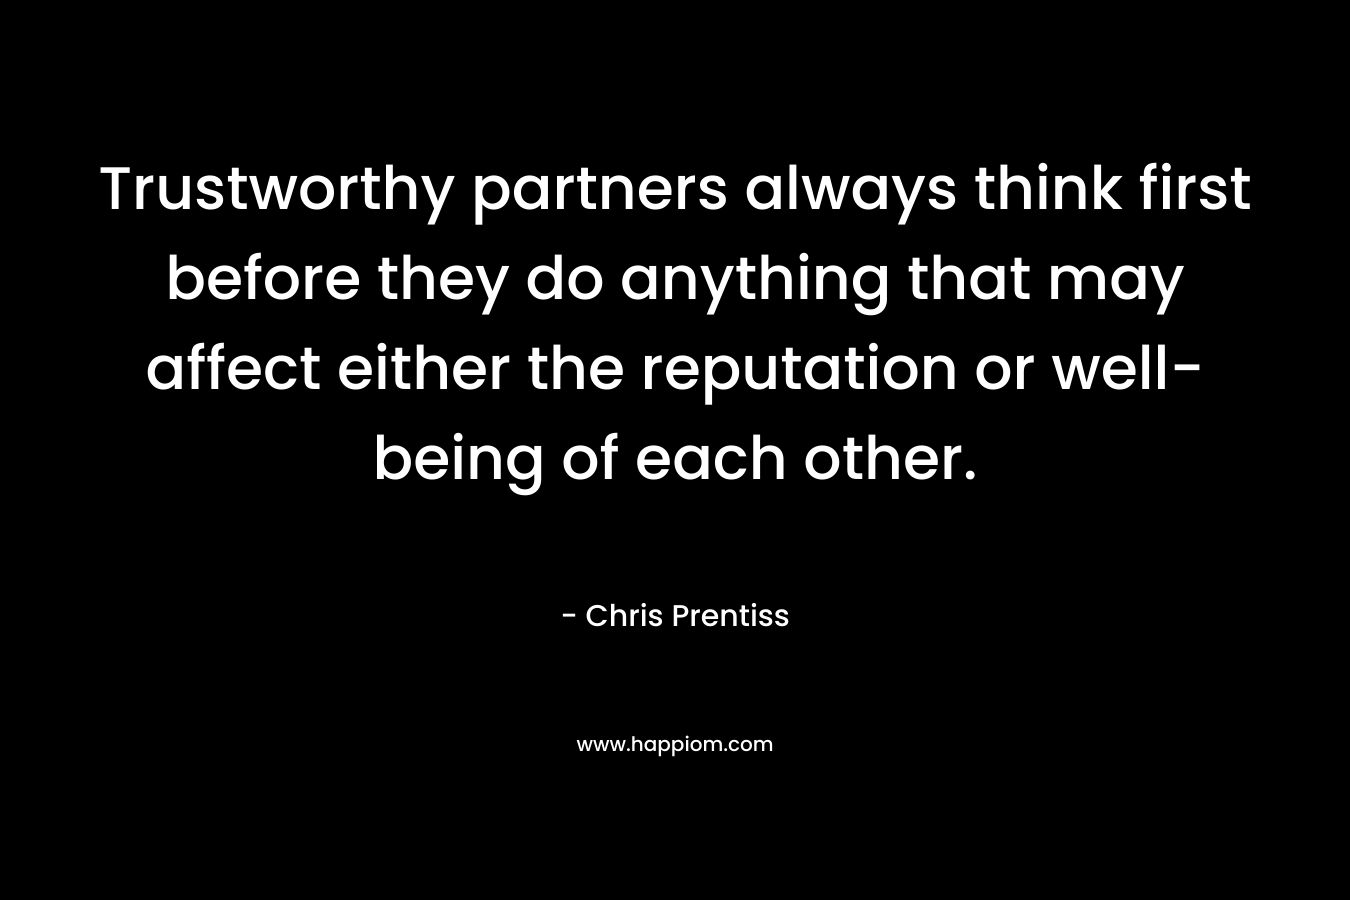 Trustworthy partners always think first before they do anything that may affect either the reputation or well-being of each other.